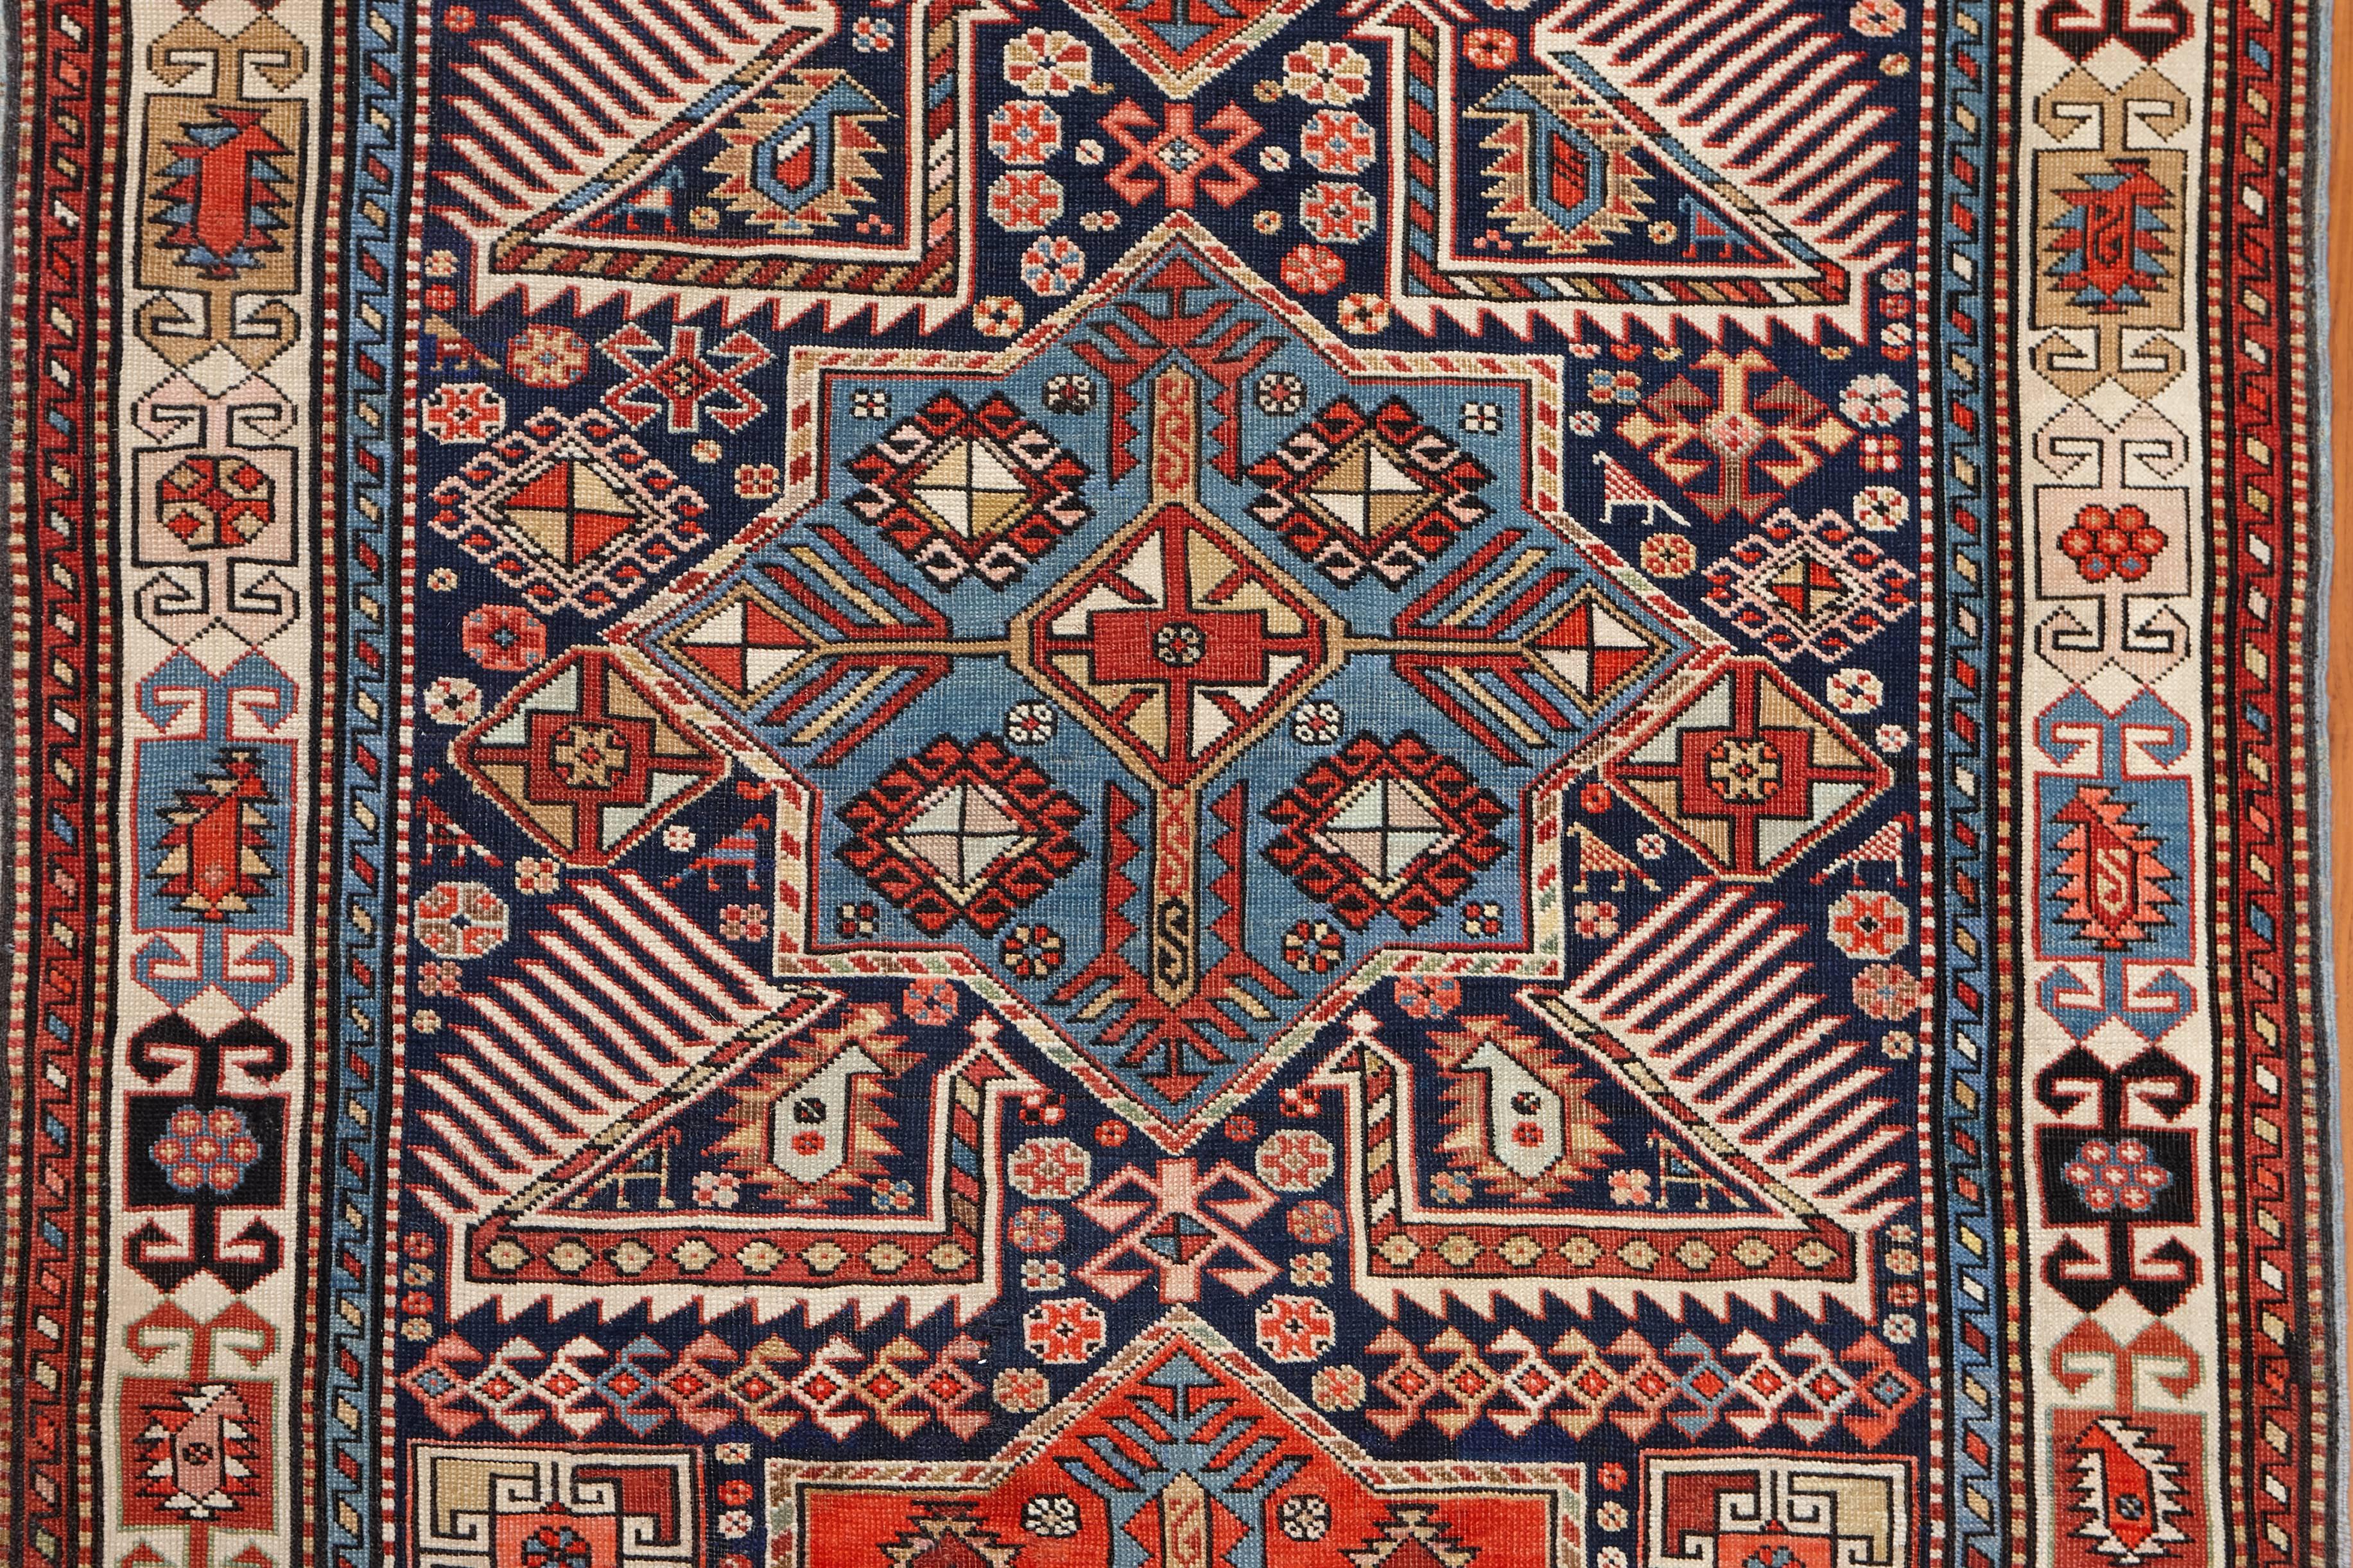 Some of the most recognizable rugs weaved in the Shirvan region are Akstafa rugs. Noted for their use of exemplary Akstafa stars and stylized peacocks, these rugs have stood the test of time with their combinations of earthy & light colors and